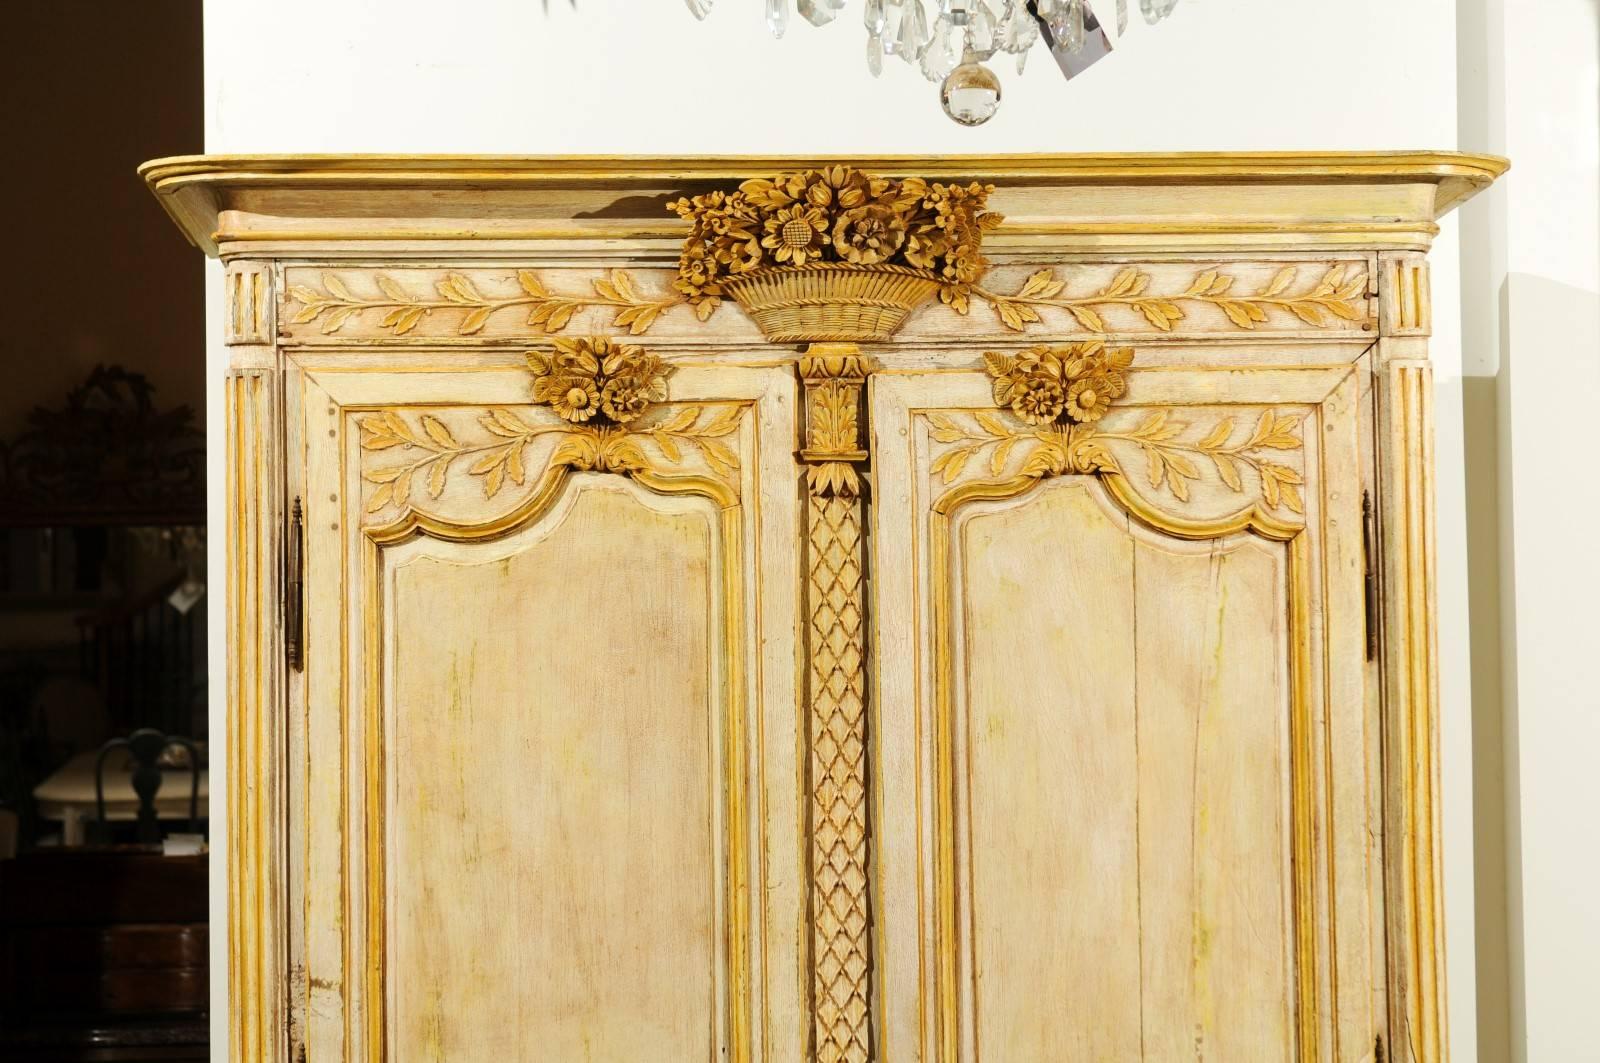 Louis XVI French Mid-18th Century Transition Painted Armoire with Floral Carved Cornice